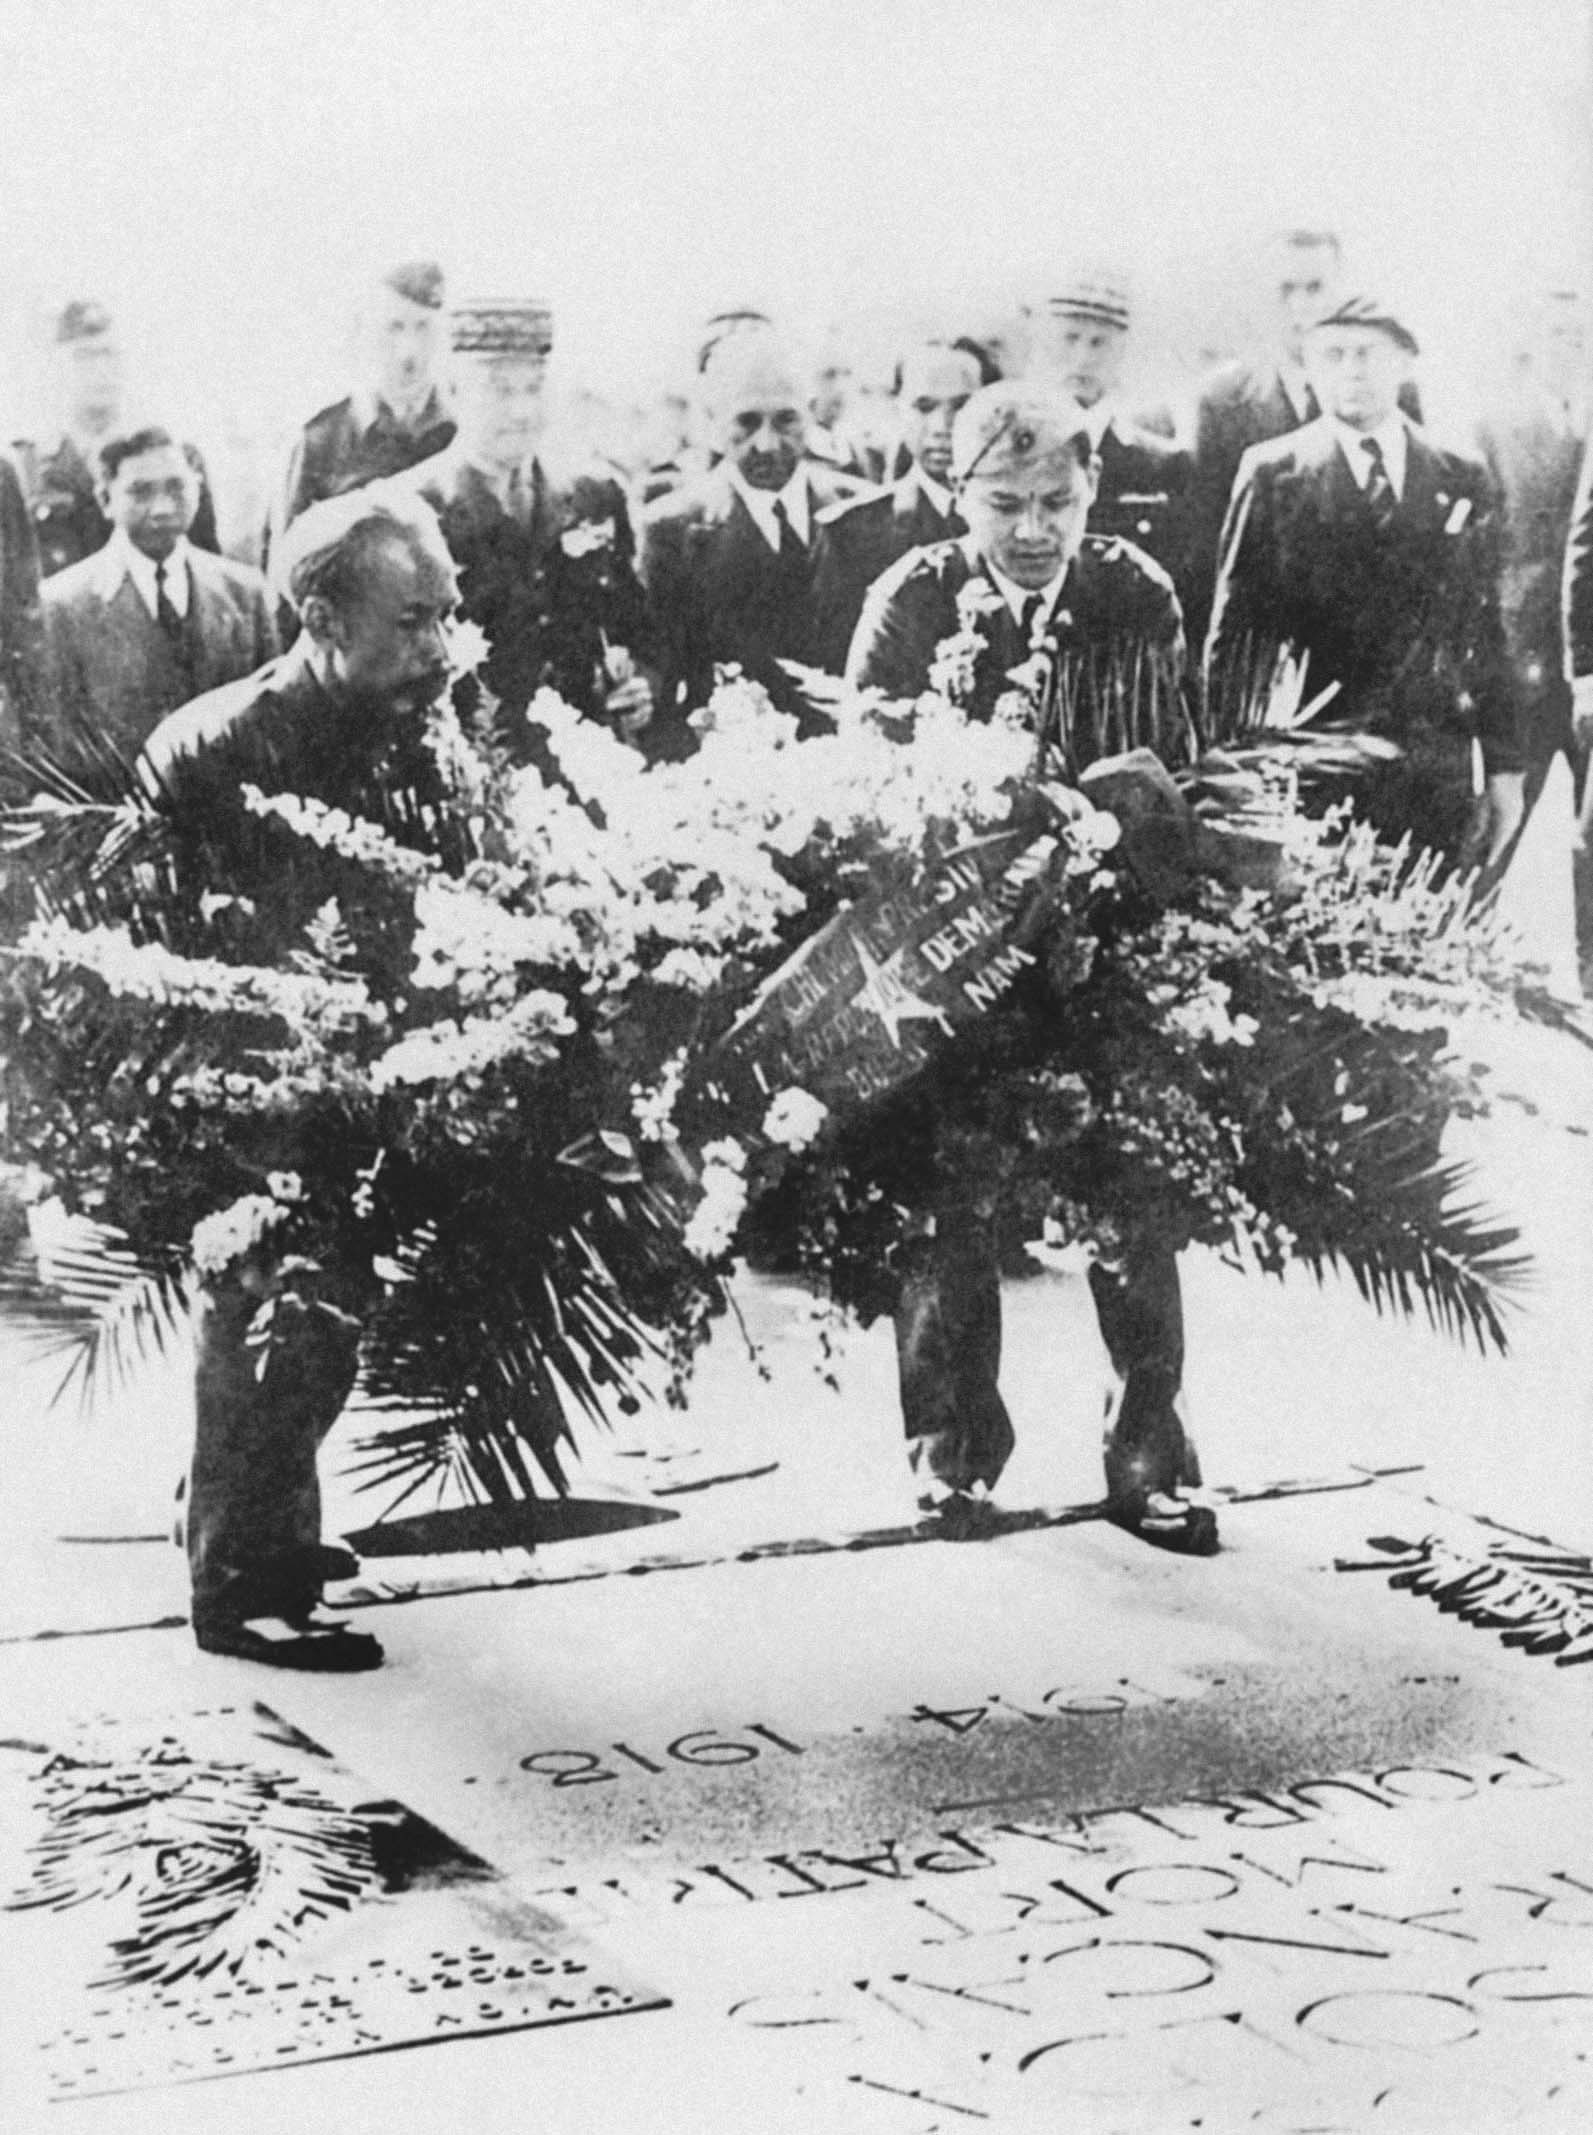 President Ho Chi Minh laying a wreath in tribute to the fighter for the independence and freedom of France at the Triumphal Arch, Paris, France (June, 1946)